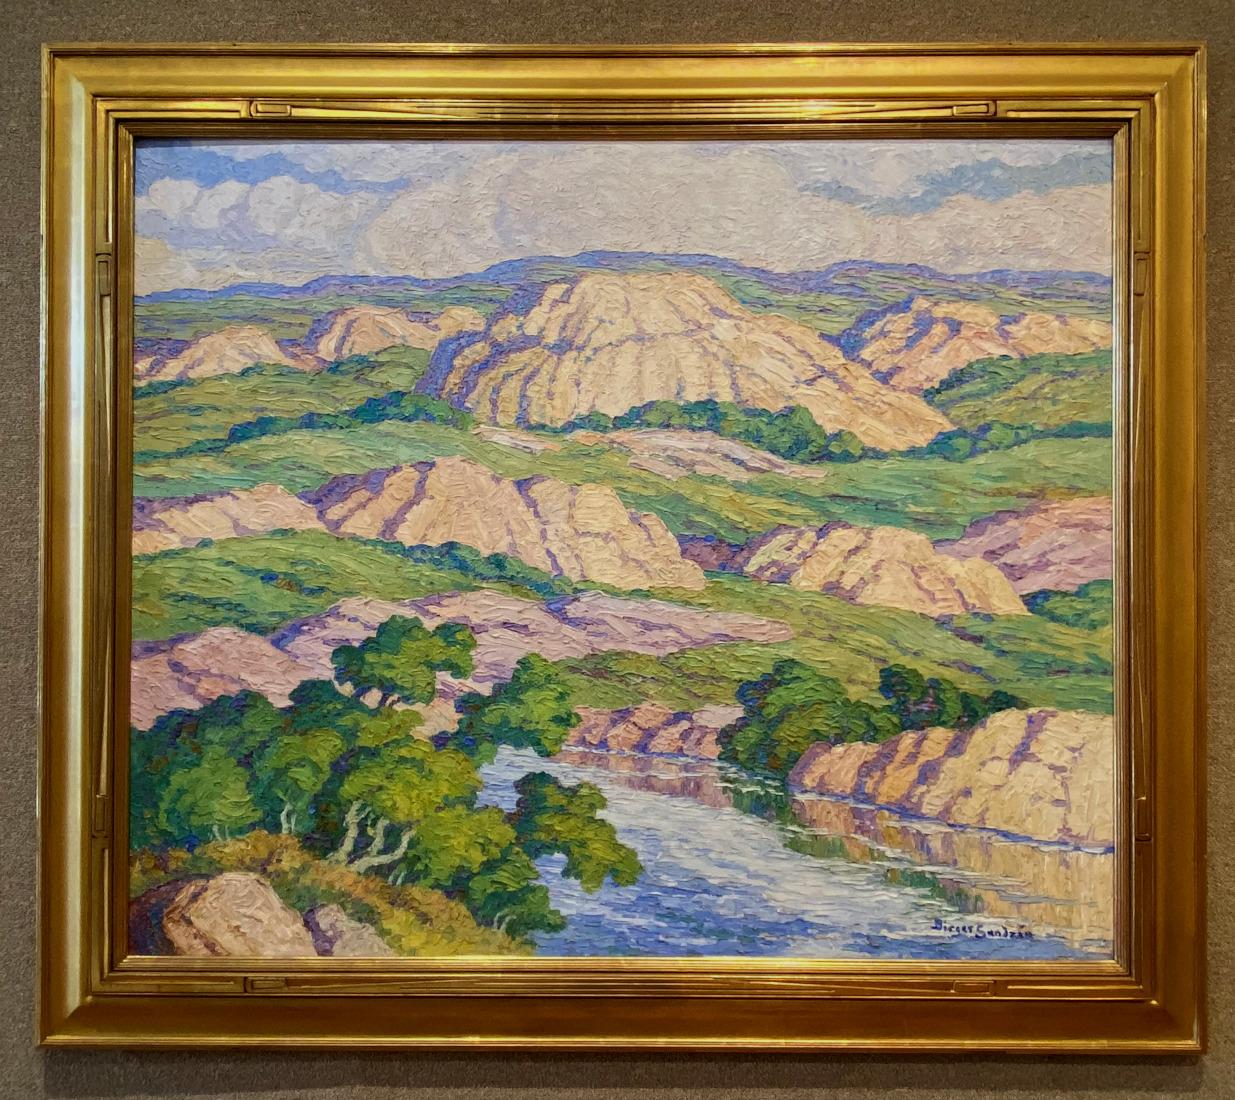 Birger Sandzen Landscape Painting - "ROLLING HILLS"  LARGE PIECE 40" x 48" ORIGINALLY FROM HIS DAUGHTERS COLLECTION